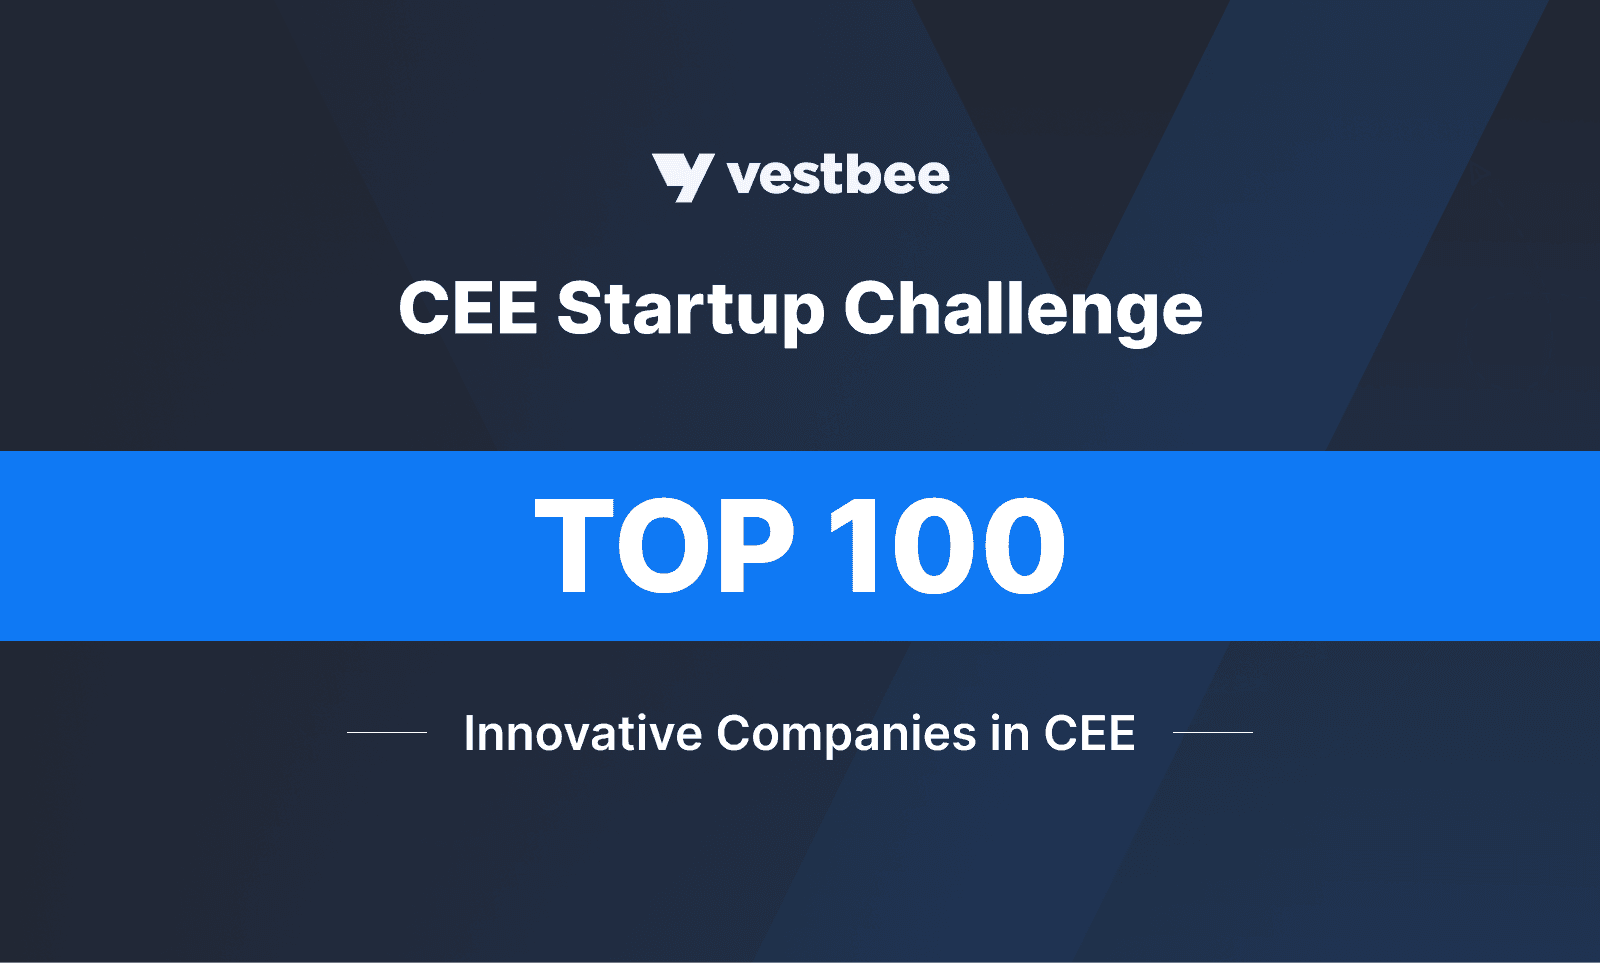 SmartyMeet is among the top 100 innovative companies in CEE